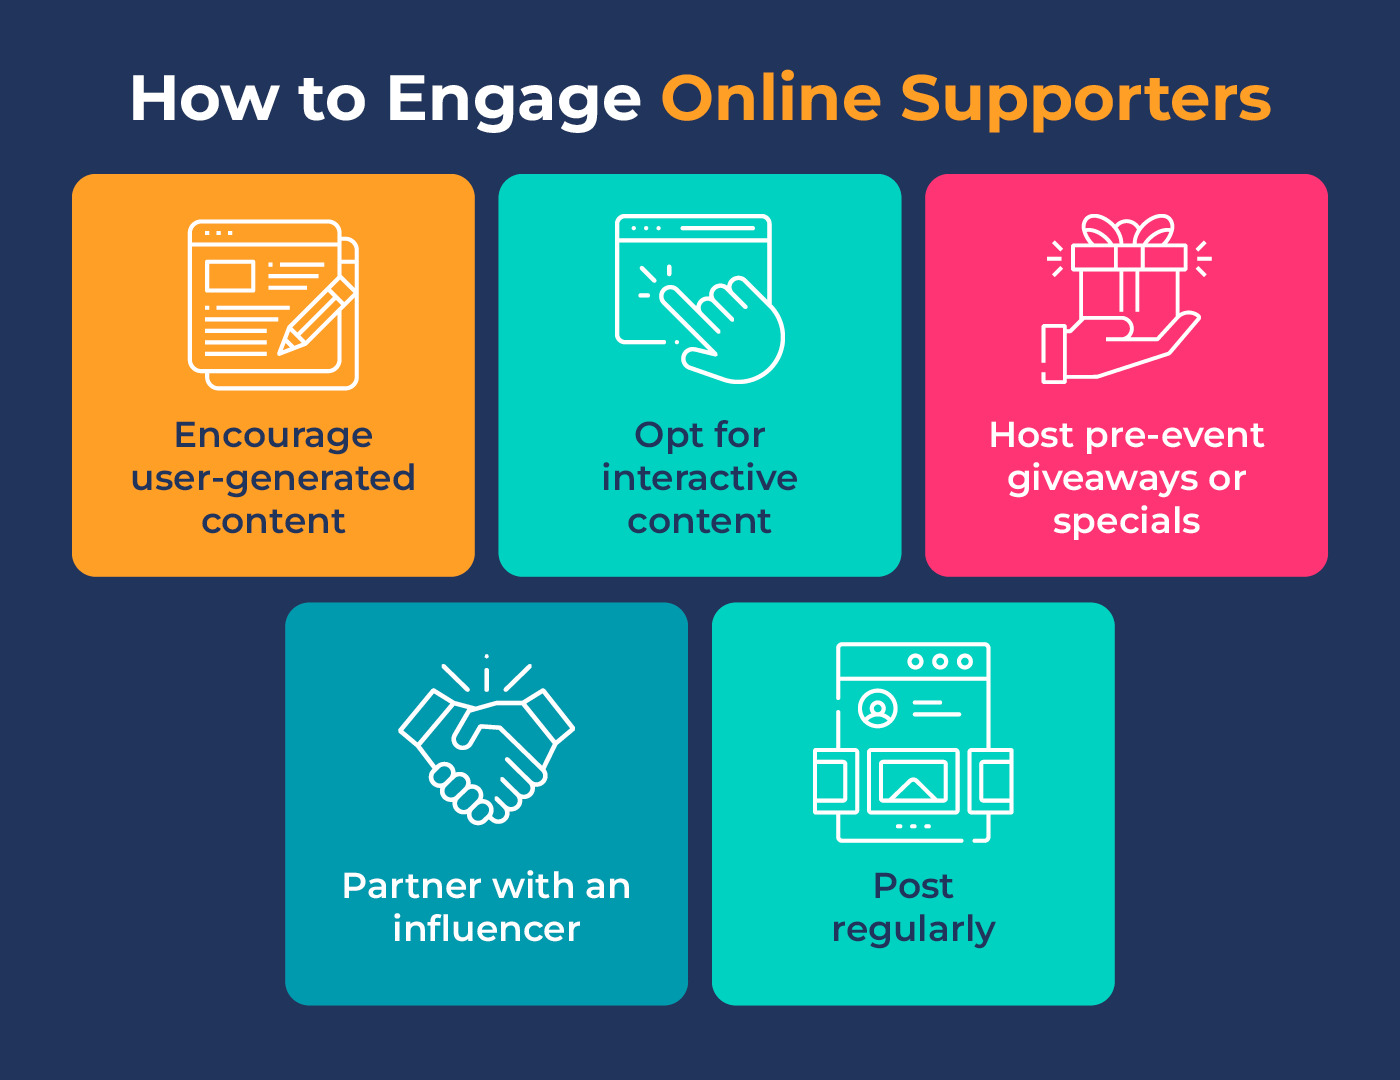 This image shows five ways you can maximize online supporter engagement for silent auctions, which are all briefly explained in the text below.